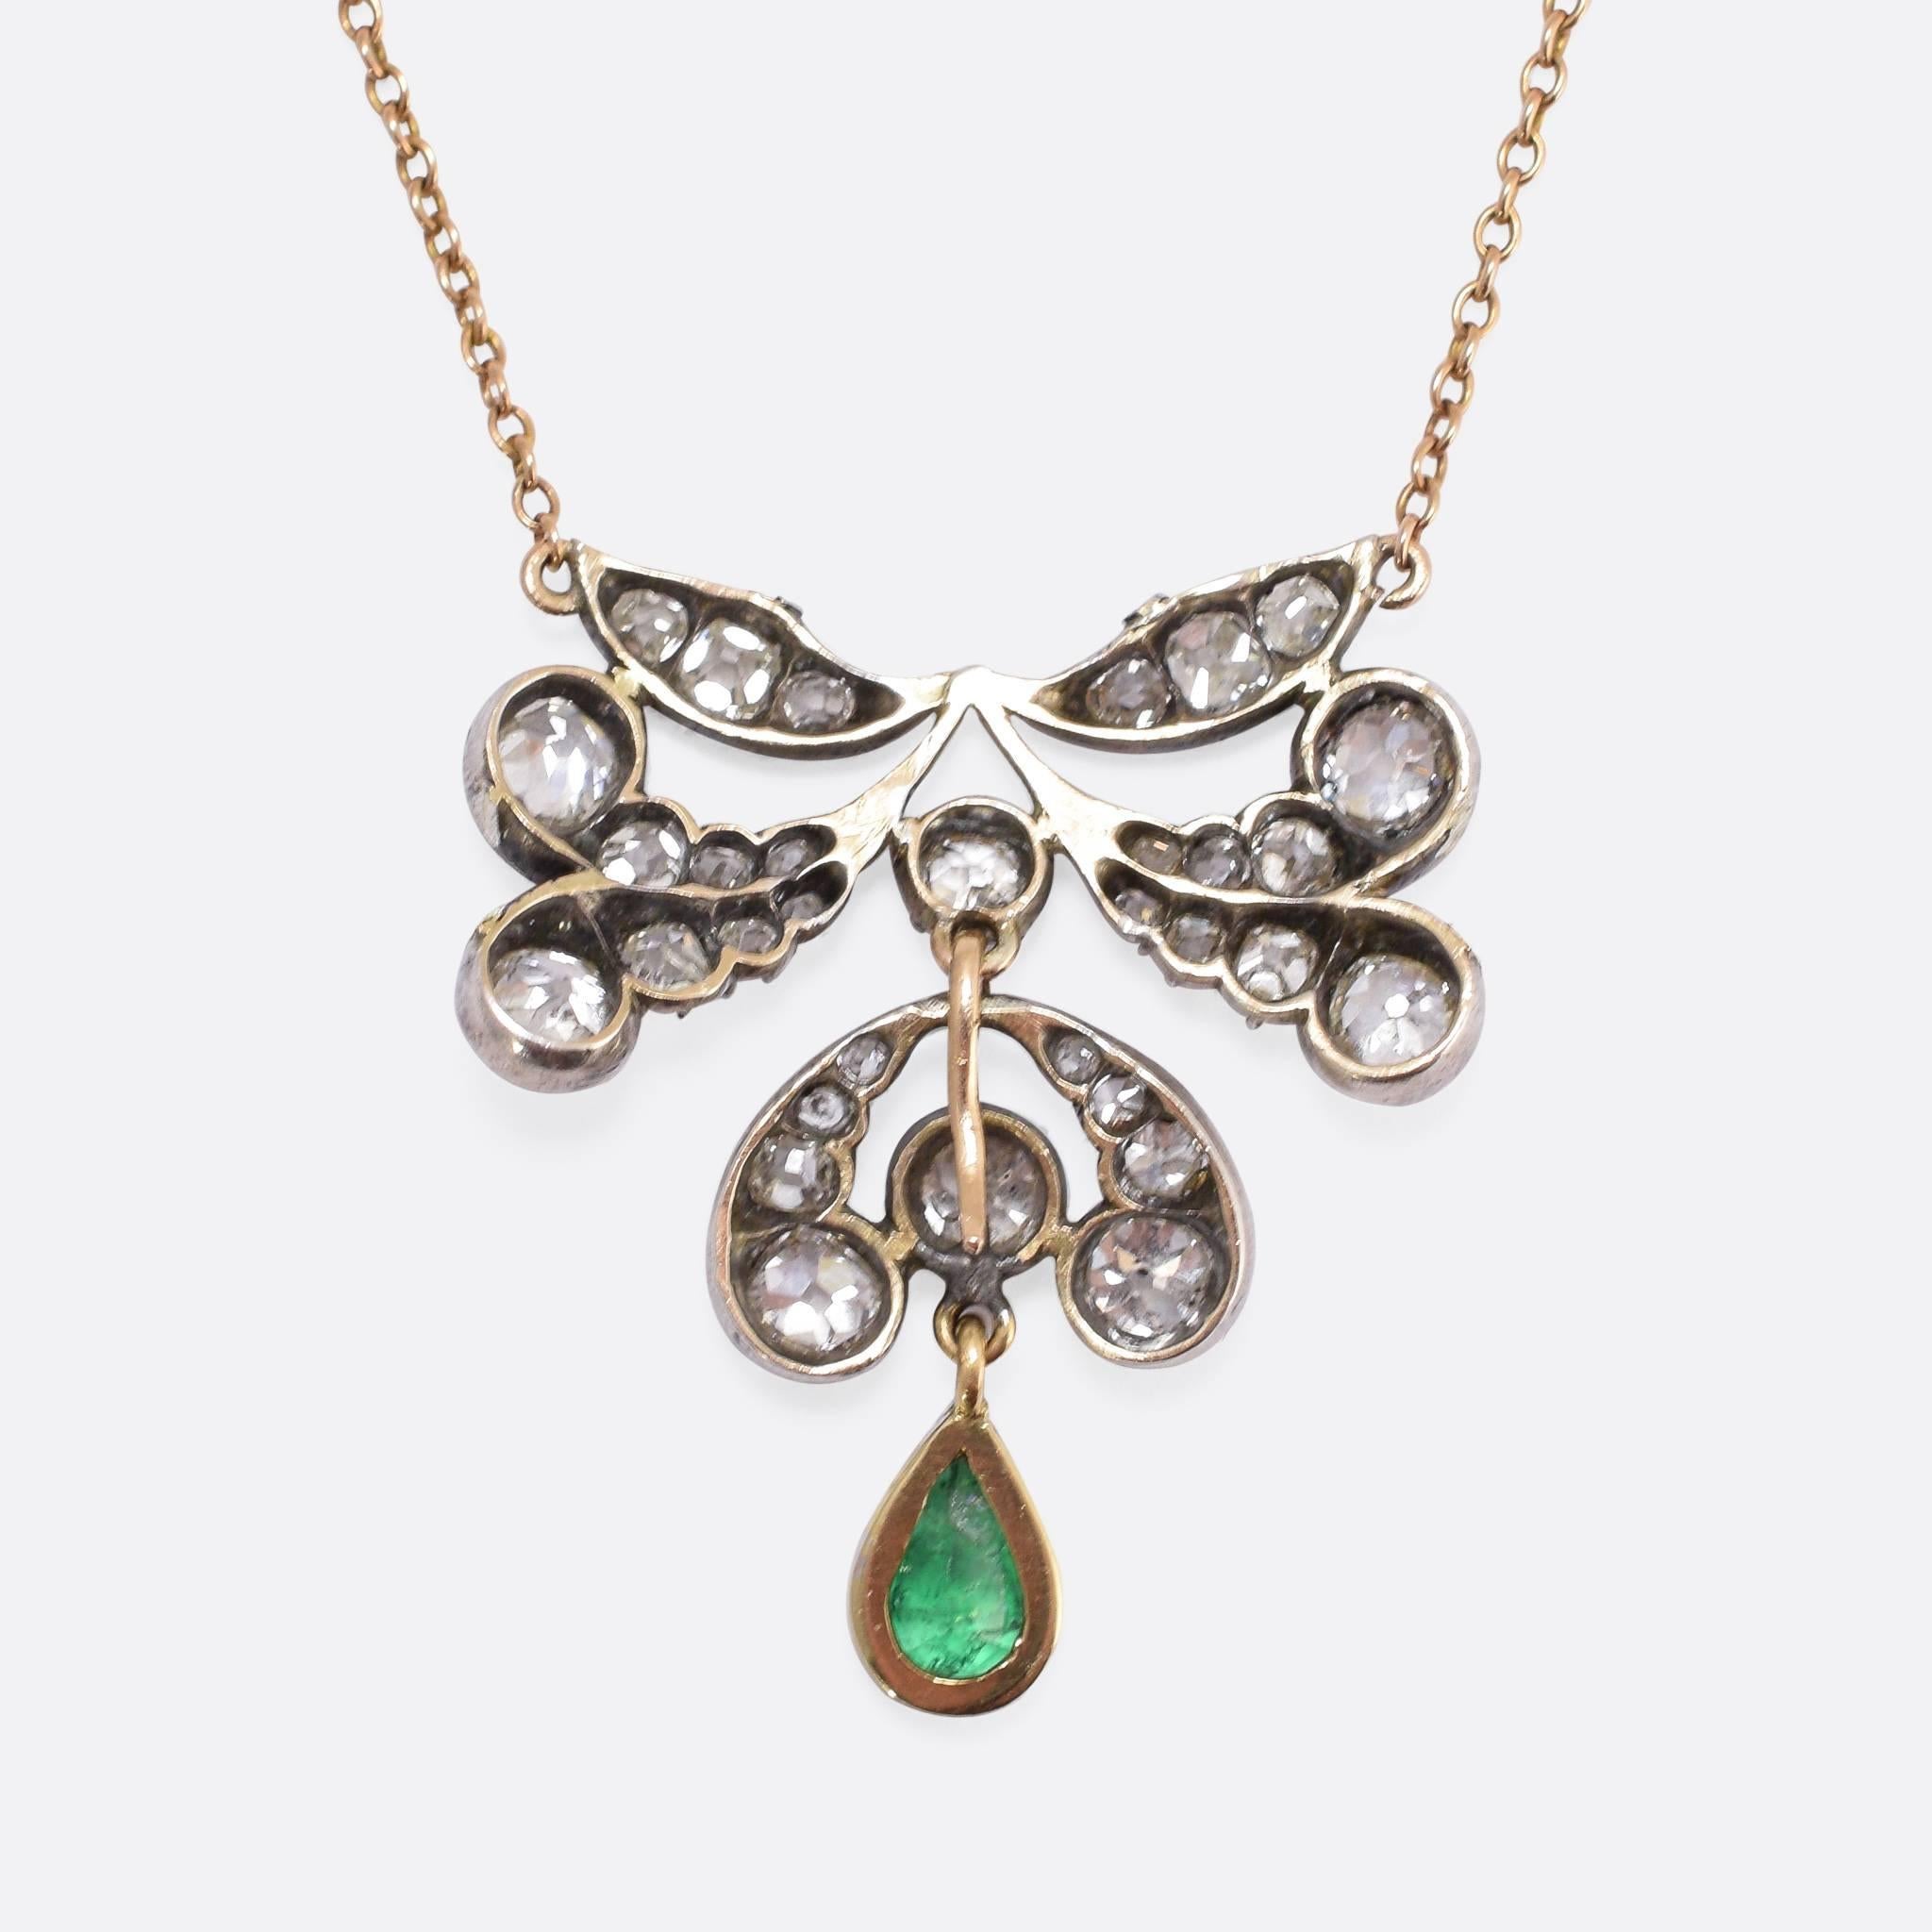 A superb early Victorian necklace, set with around 1.70 carats of old cut diamonds, and a beautiful natural emerald drop. Modelled in 15ct gold and silver, the piece hangs on a 16.5 inch chain and sits beautifully just below the neck. 